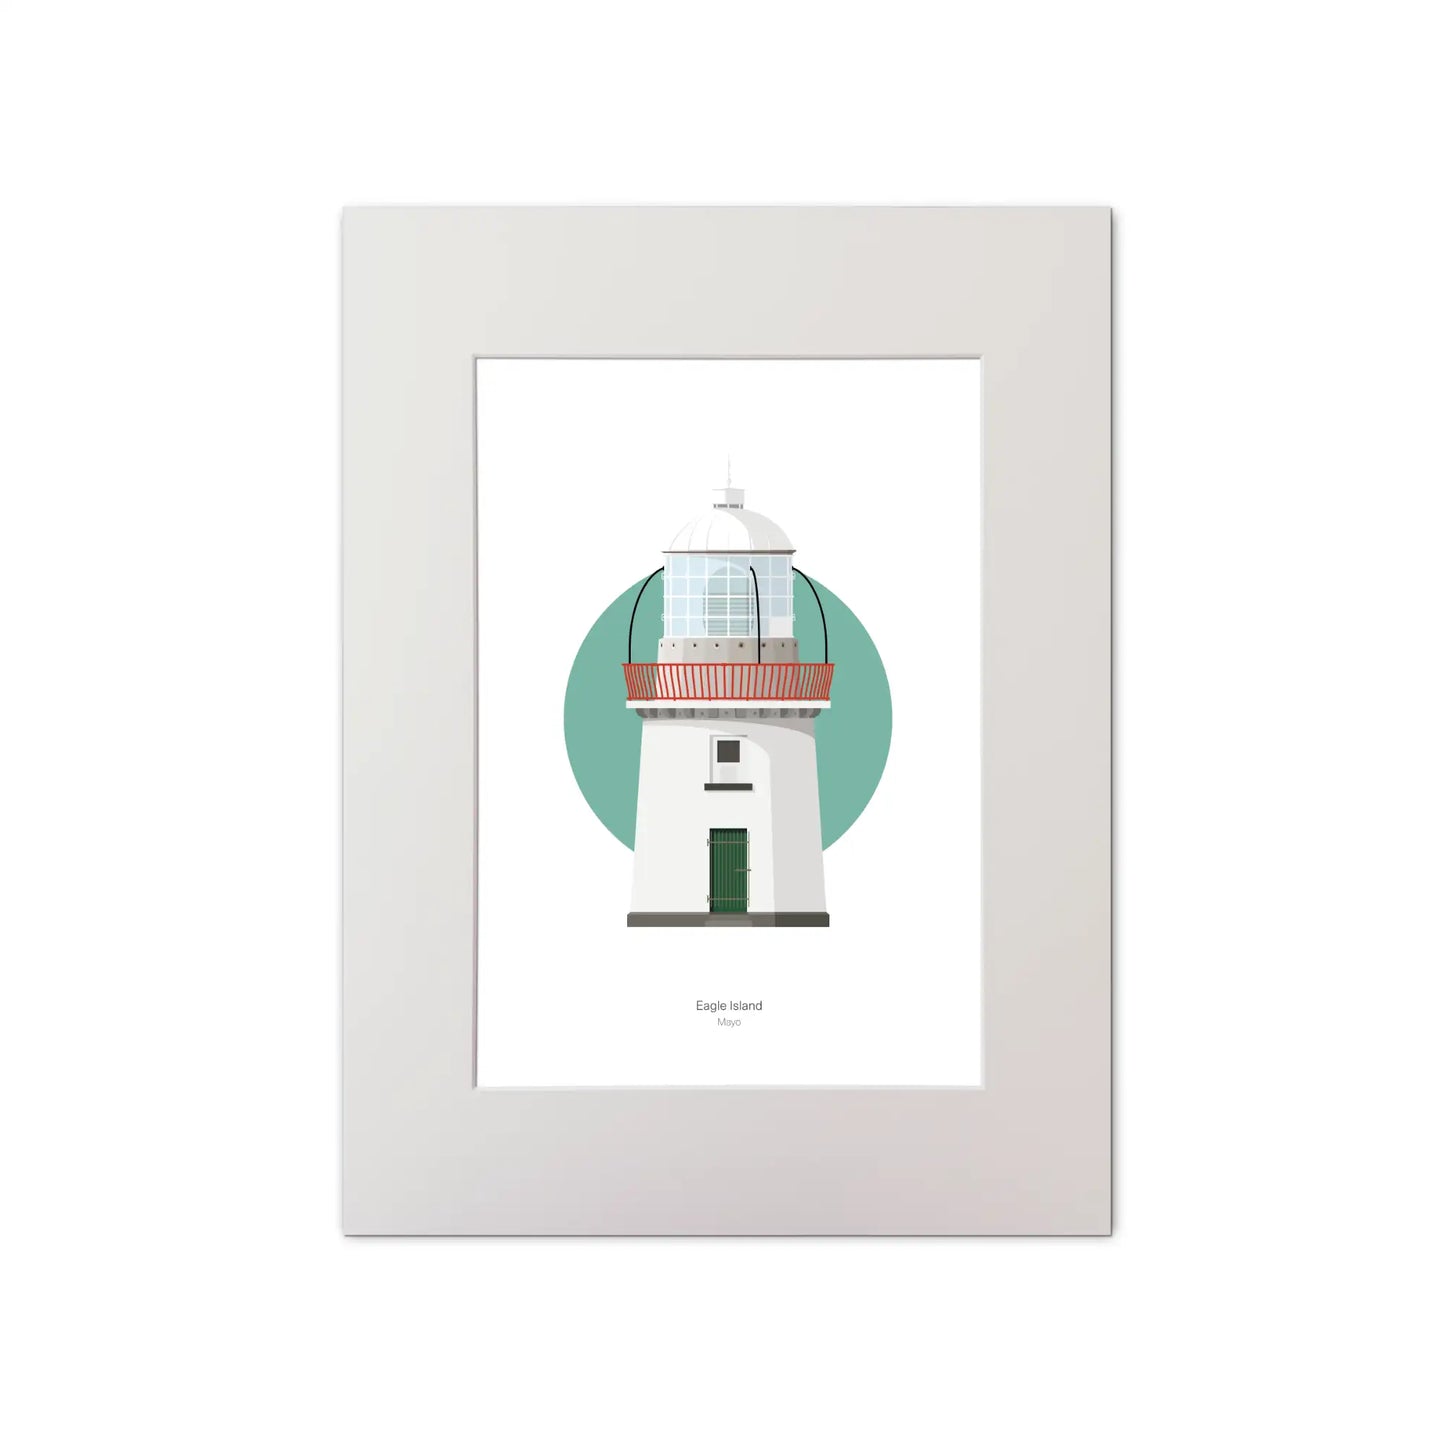 Contemporary graphic illustration of Eagle Island lighthouse on a white background inside light blue square, mounted and measuring 30x40cm.